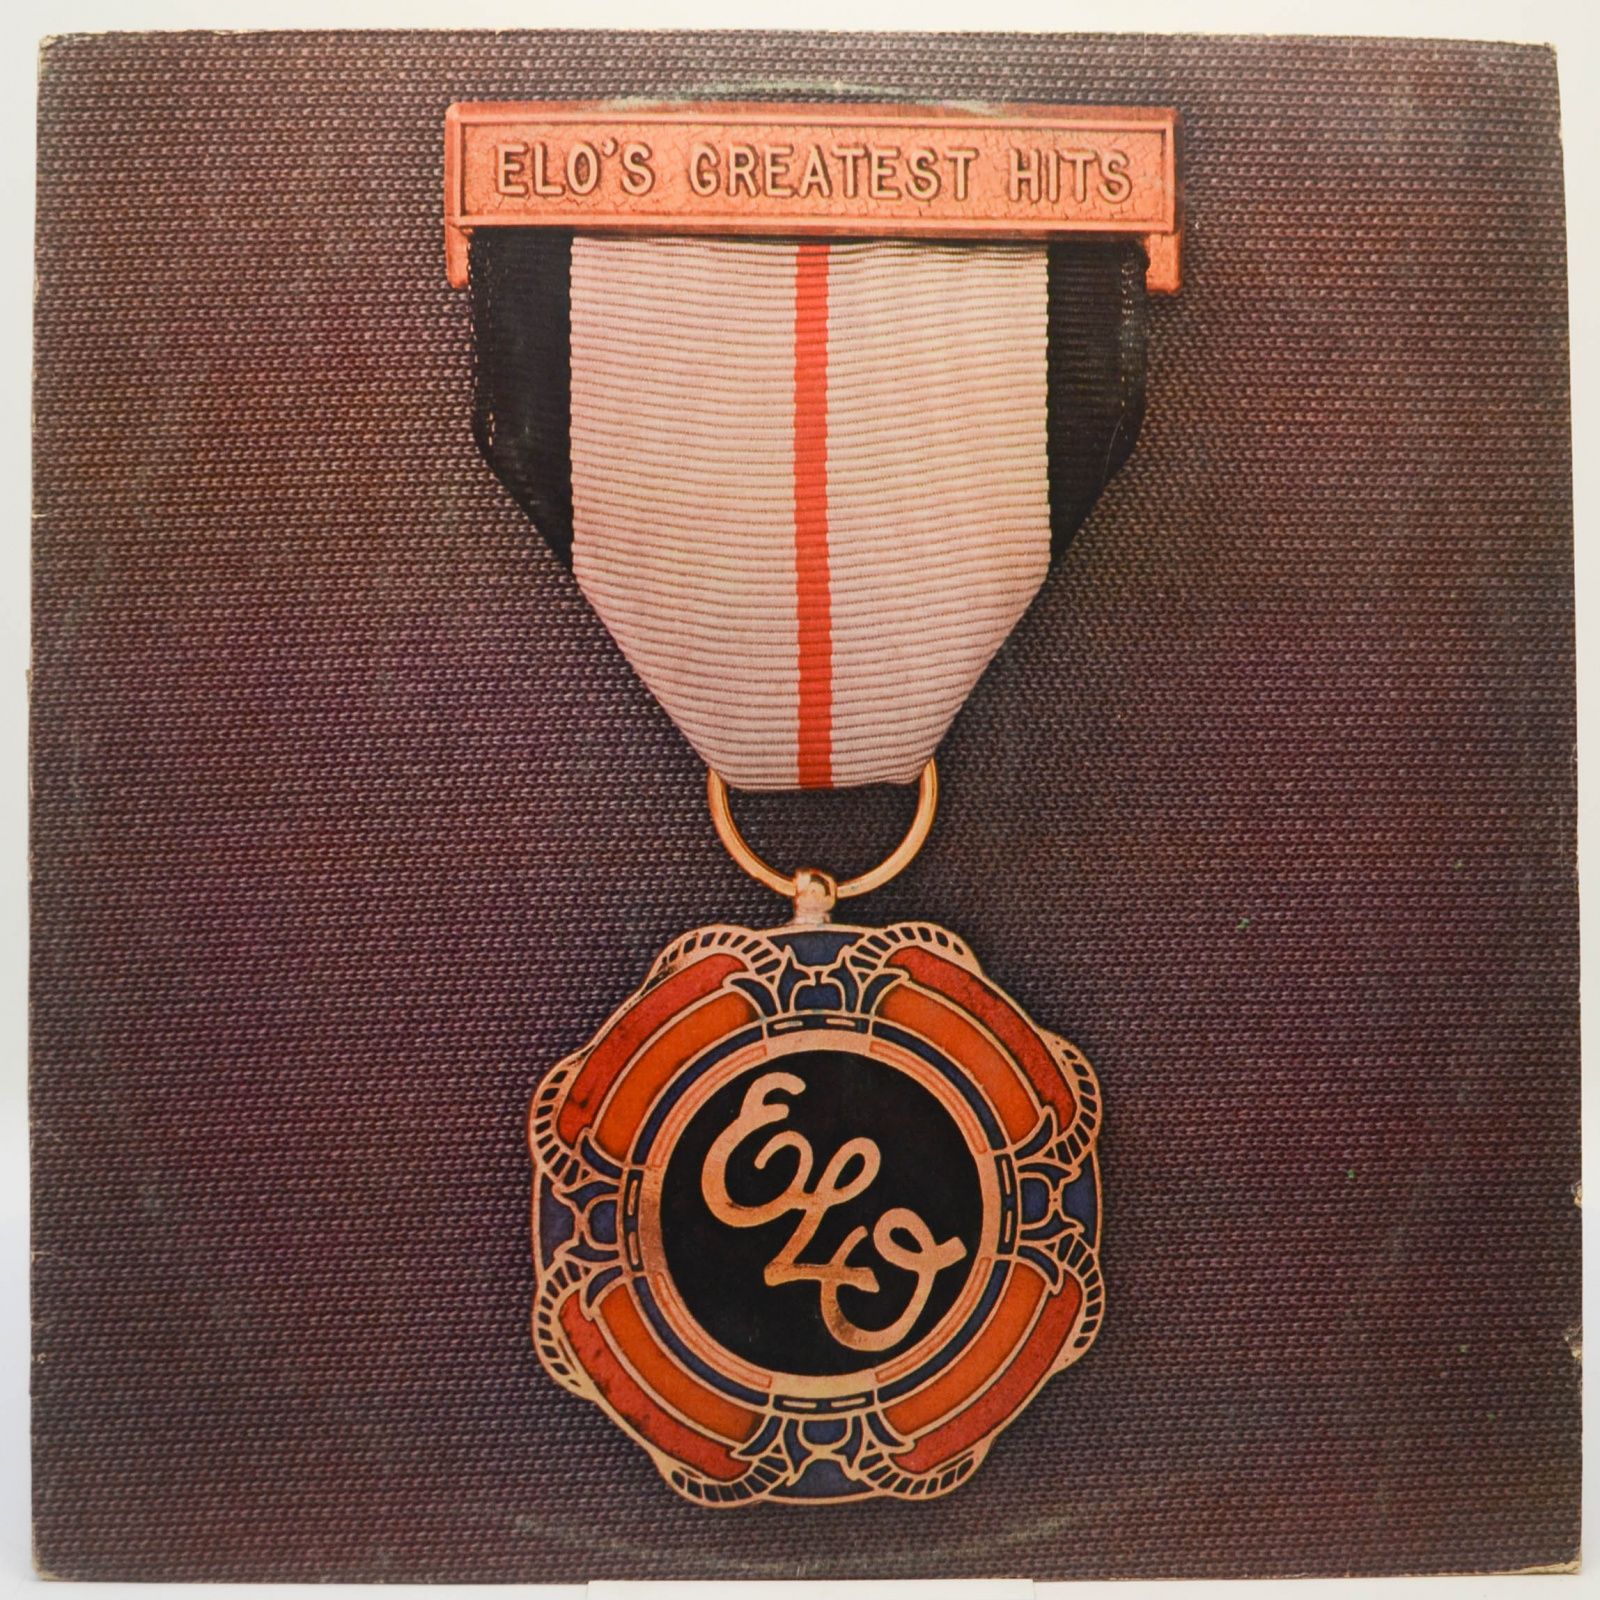 Electric Light Orchestra — ELO's Greatest Hits, 1979